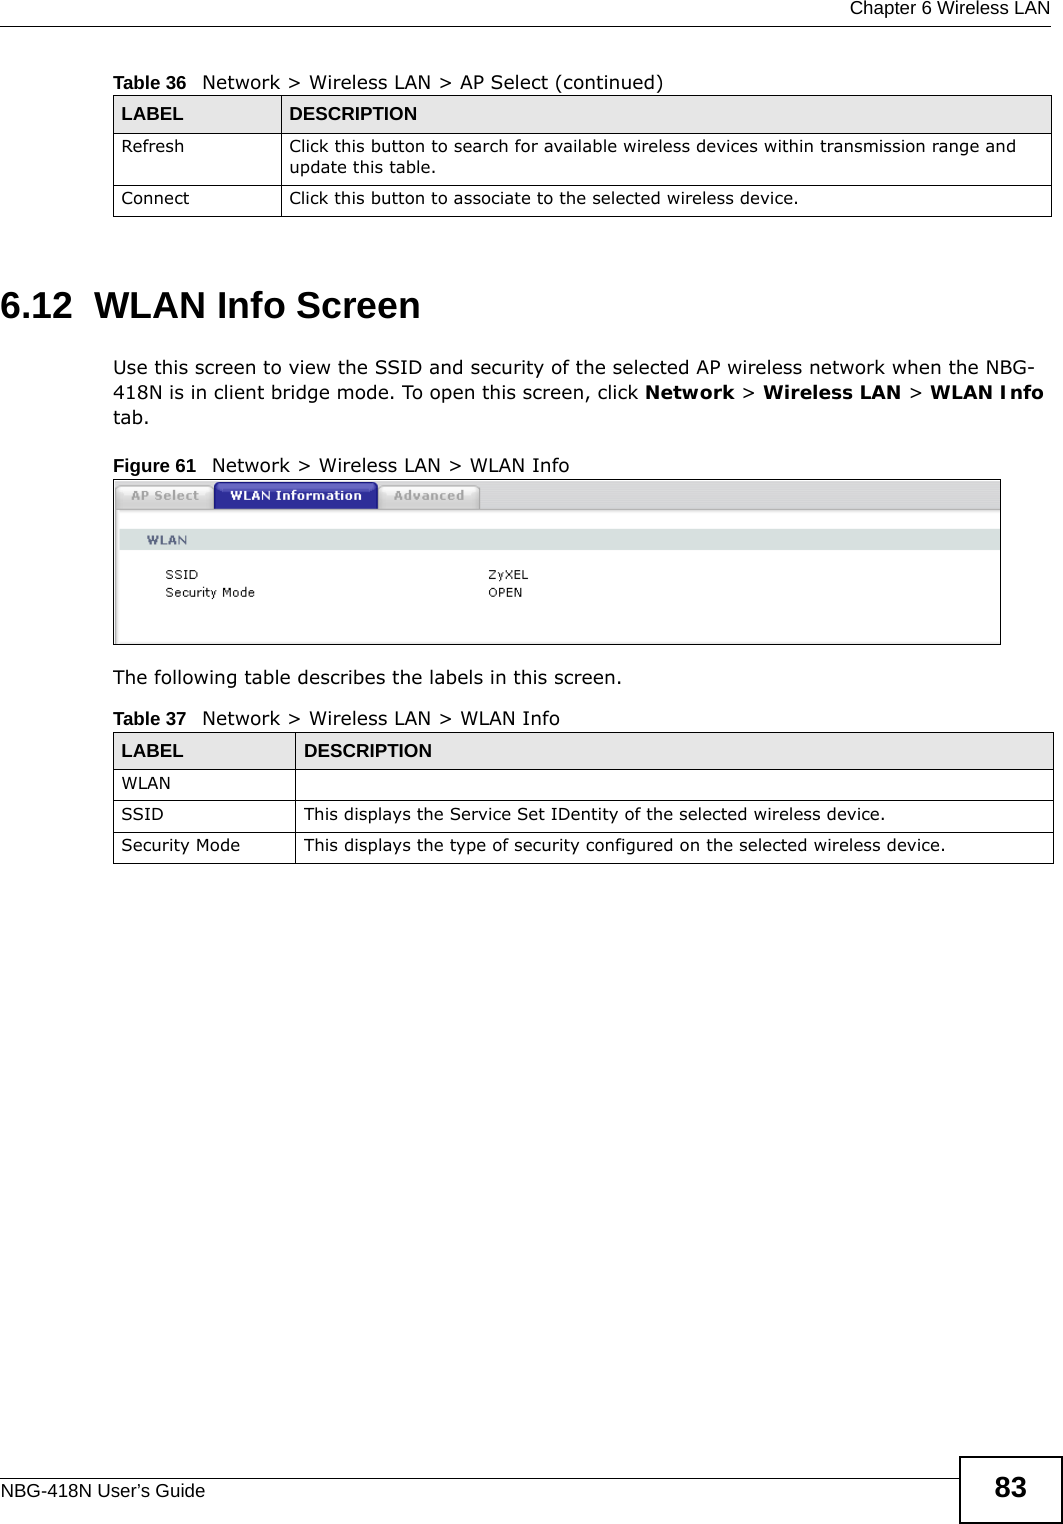  Chapter 6 Wireless LANNBG-418N User’s Guide 836.12  WLAN Info ScreenUse this screen to view the SSID and security of the selected AP wireless network when the NBG-418N is in client bridge mode. To open this screen, click Network &gt; Wireless LAN &gt; WLAN Info tab.Figure 61   Network &gt; Wireless LAN &gt; WLAN InfoThe following table describes the labels in this screen.Refresh Click this button to search for available wireless devices within transmission range and update this table.Connect Click this button to associate to the selected wireless device.Table 36   Network &gt; Wireless LAN &gt; AP Select (continued)LABEL DESCRIPTIONTable 37   Network &gt; Wireless LAN &gt; WLAN InfoLABEL DESCRIPTIONWLANSSID This displays the Service Set IDentity of the selected wireless device.Security Mode This displays the type of security configured on the selected wireless device.